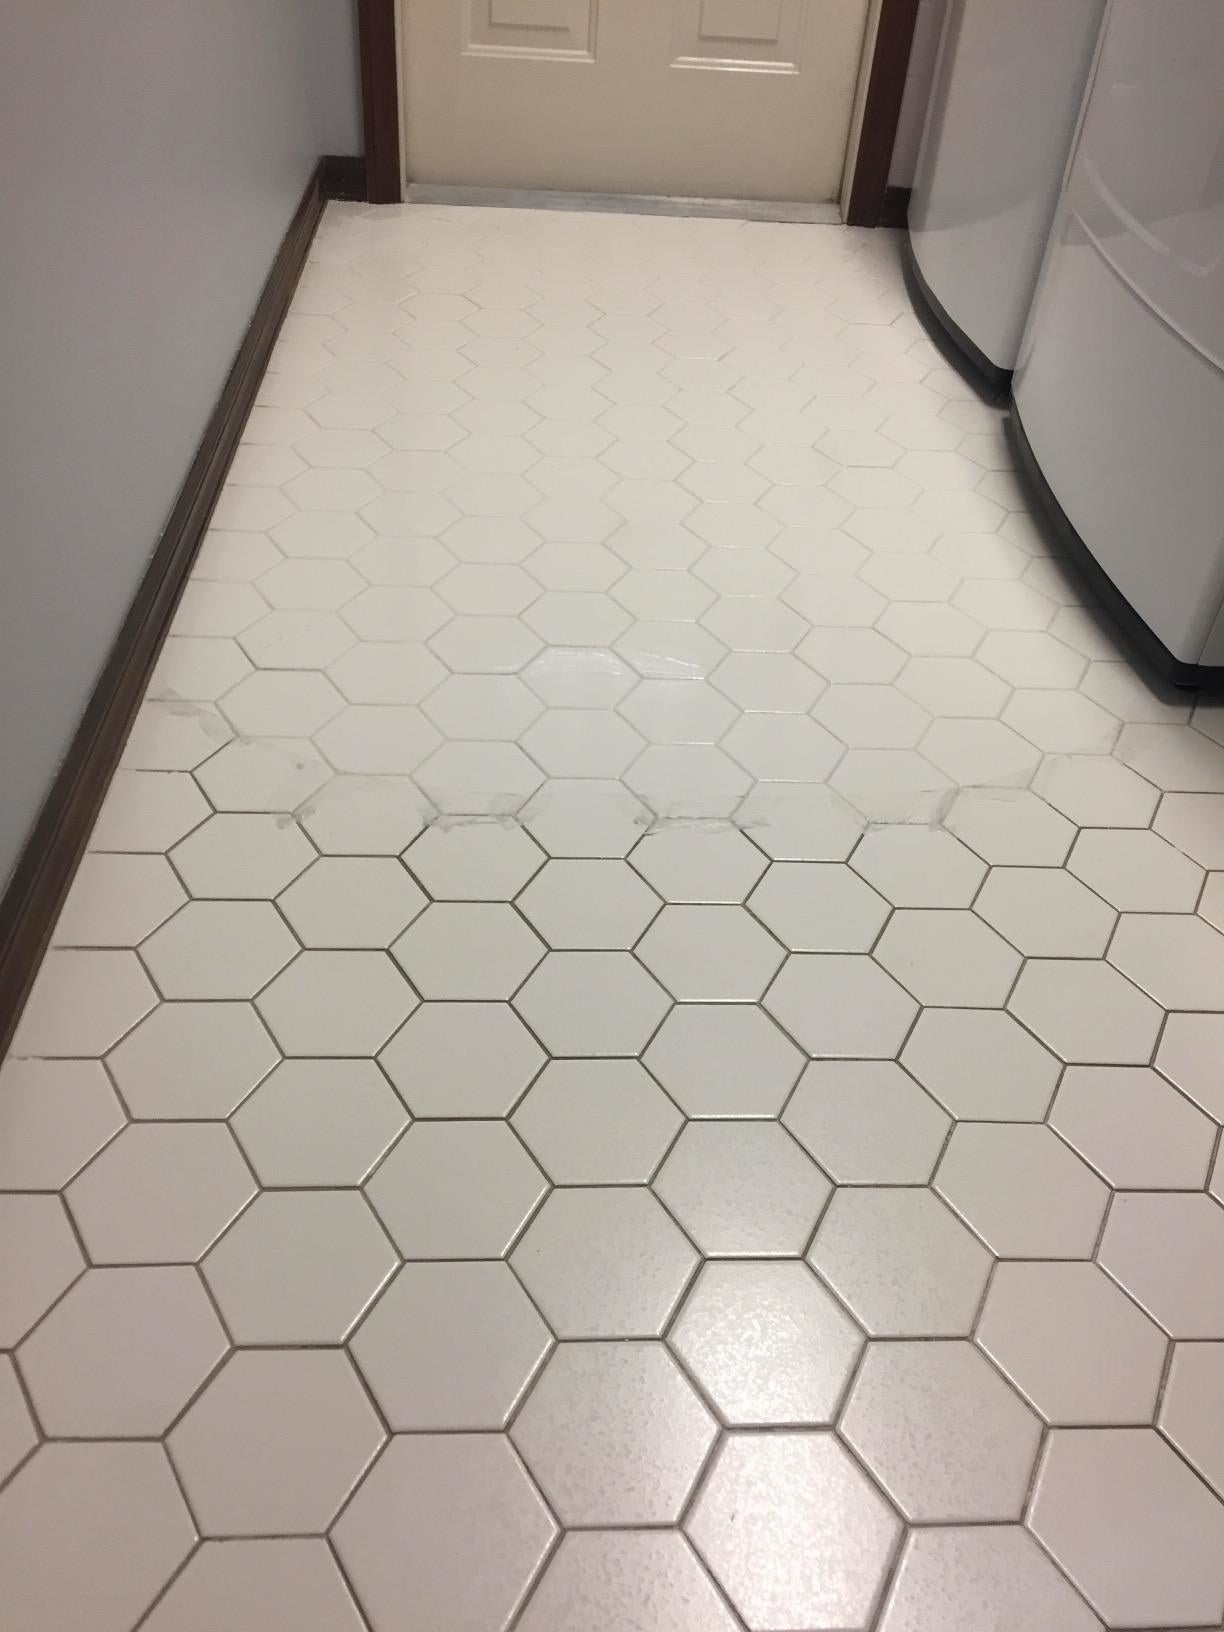 A reviewer photo of a tile floor with half the floor switch stained grout and the other half looking clean 